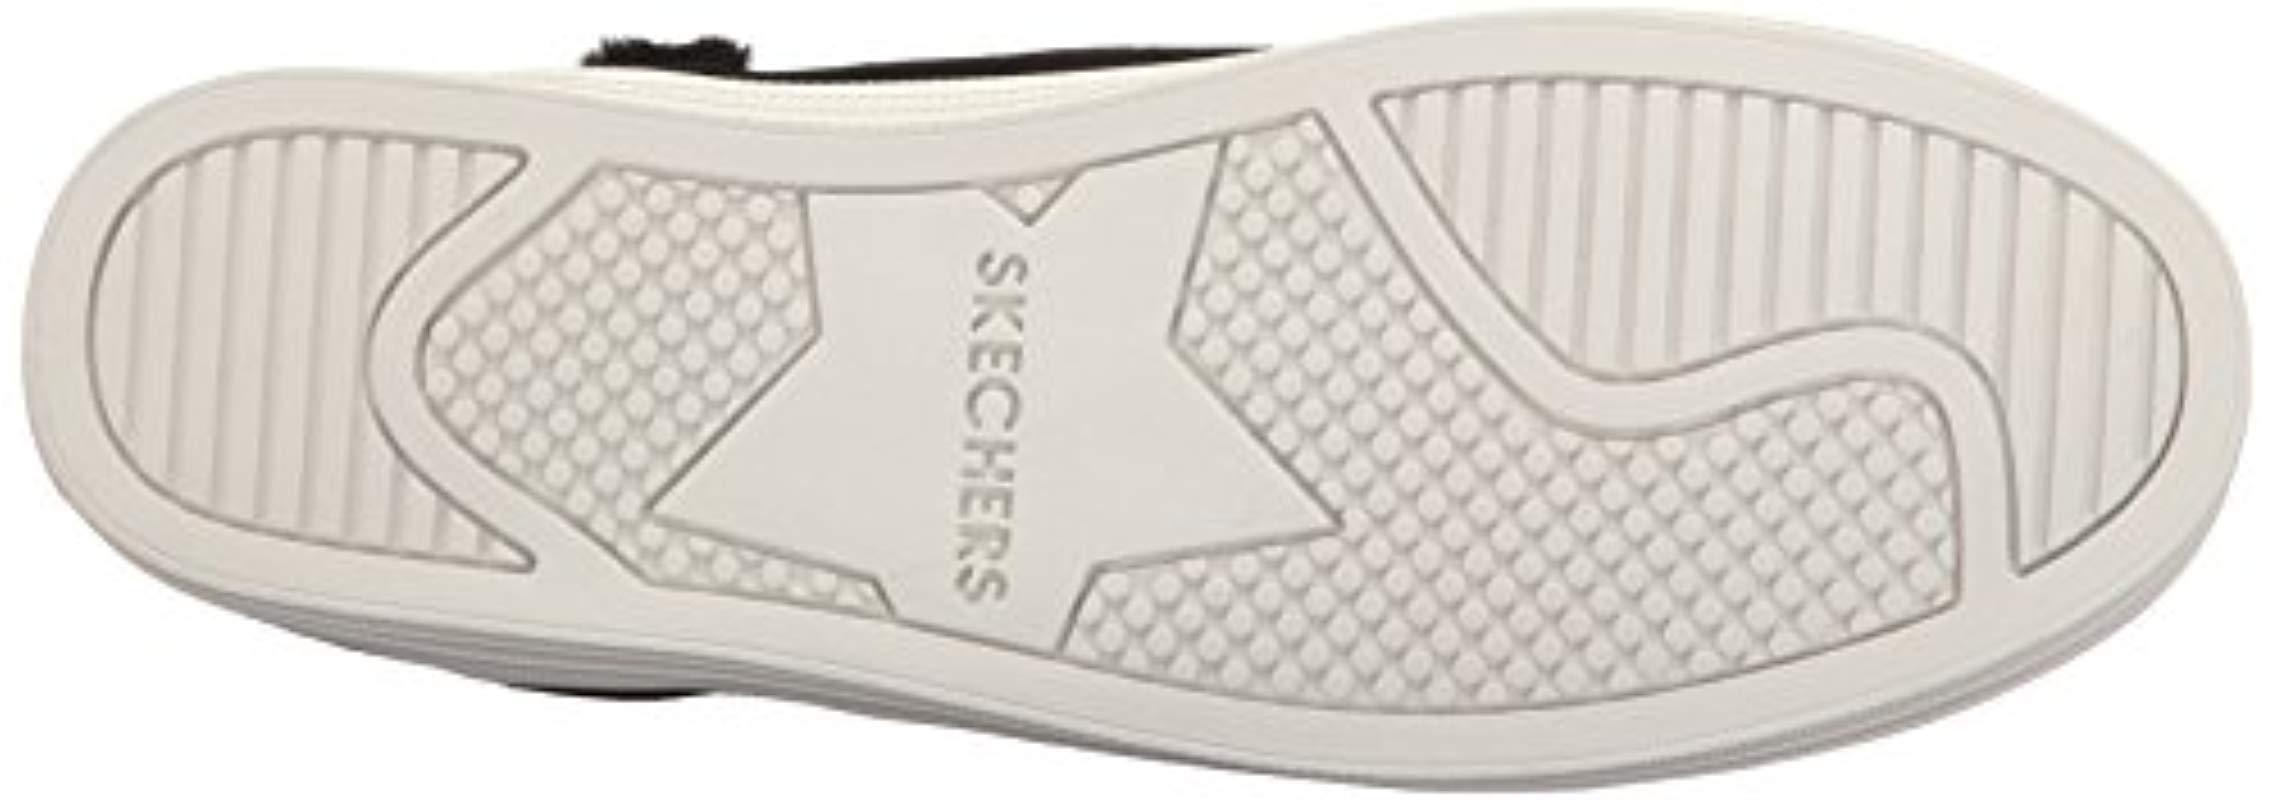 skechers double up over the edge